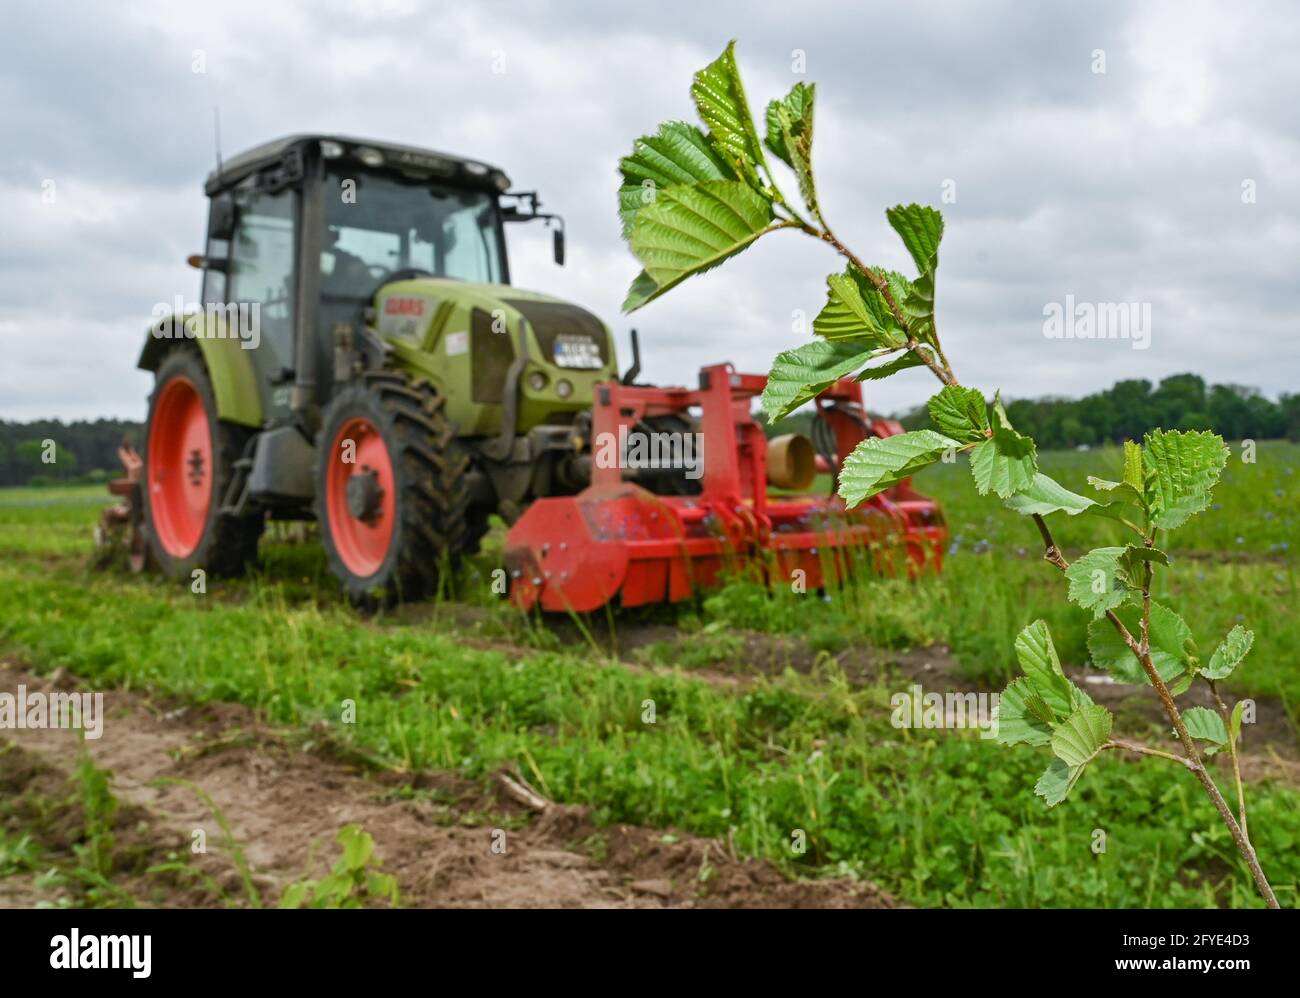 27 May 2021, Brandenburg, Krügersdorf: An employee of Oegelner Fließ Dienstleistungs GmbH & Co. KG works the soil on a new forest area where small trees are already growing. Tesla is building a state-of-the-art plant for electric cars in Brandenburg. Trees were felled for it. Other areas are now being reforested for this purpose. New forest areas are being created. The mini trees are growing up. Photo: Patrick Pleul/dpa-Zentralbild/dpa Stock Photo